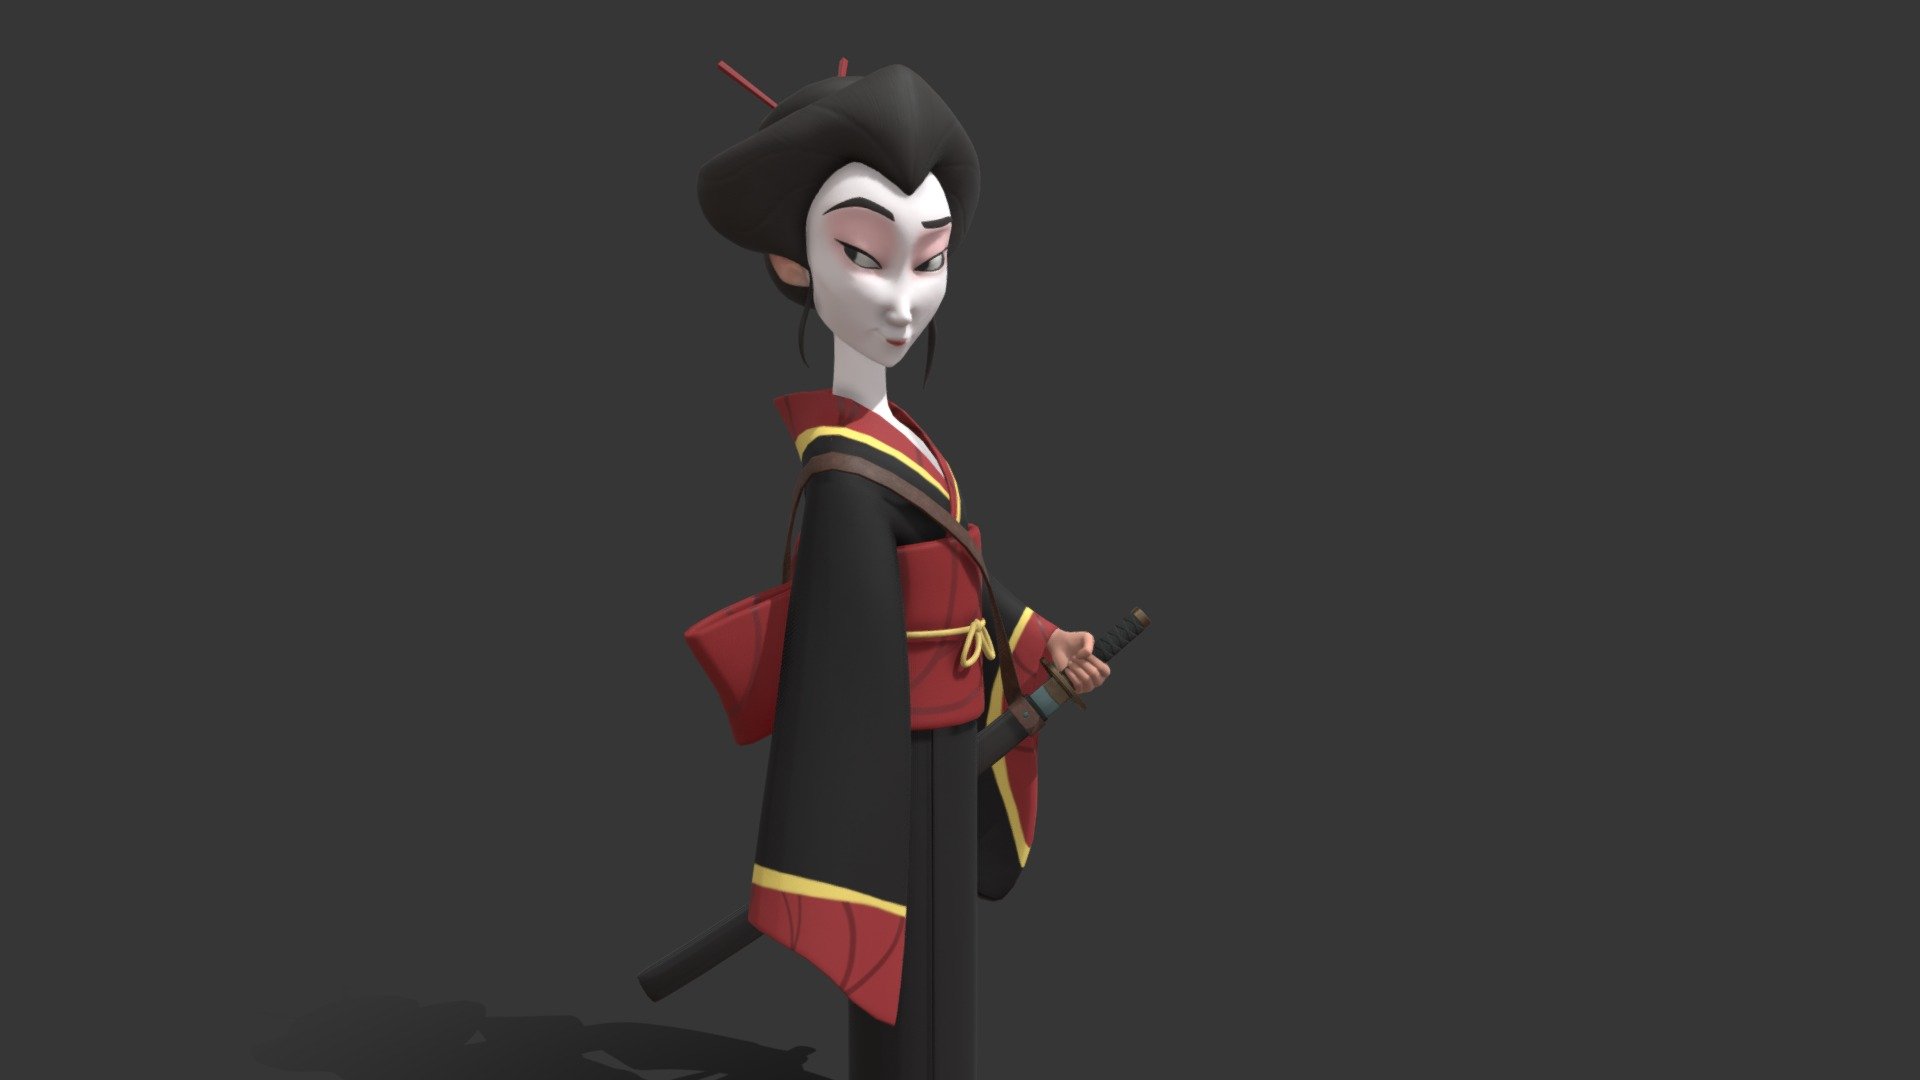 A geisha character I remodeled based off a design by Lucy Feng. Modeled with Zbrush and Maya, and textured with substance 3D painter 3d model